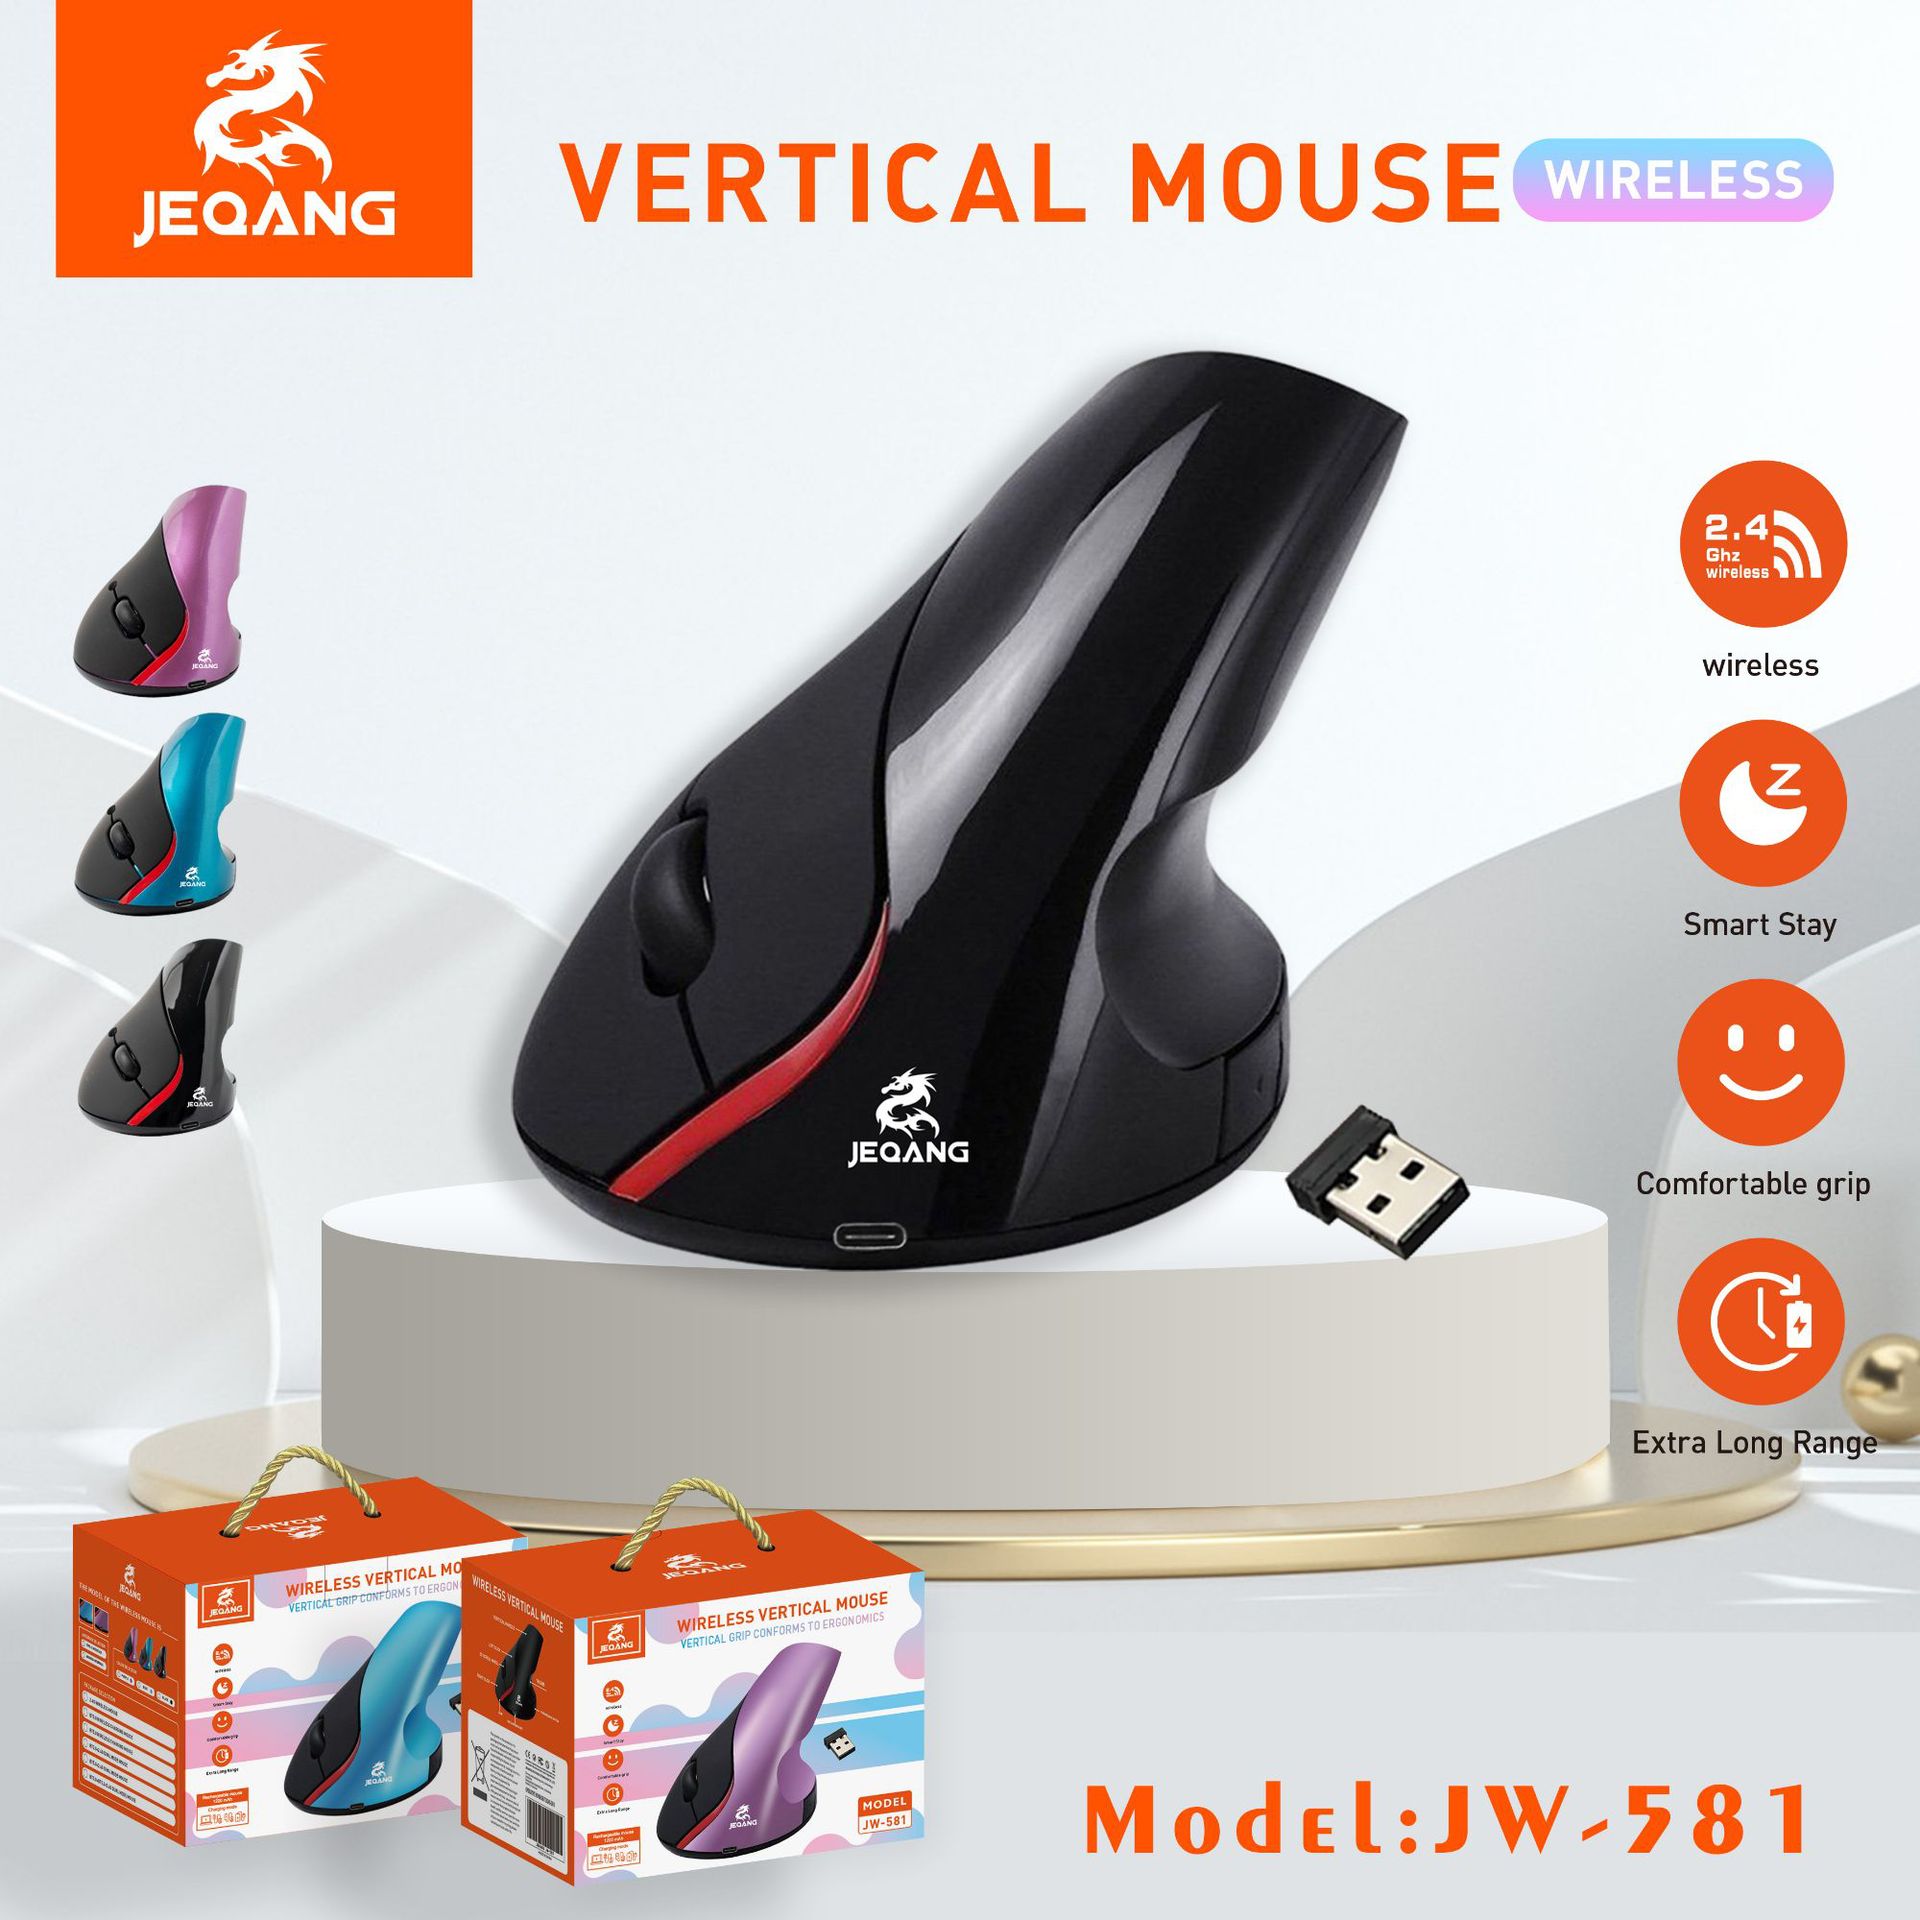 New 2.4G Wireless Stereo Vertical Mouse Ergonomic Design Suitable for Office Left and Right Hand Mouse